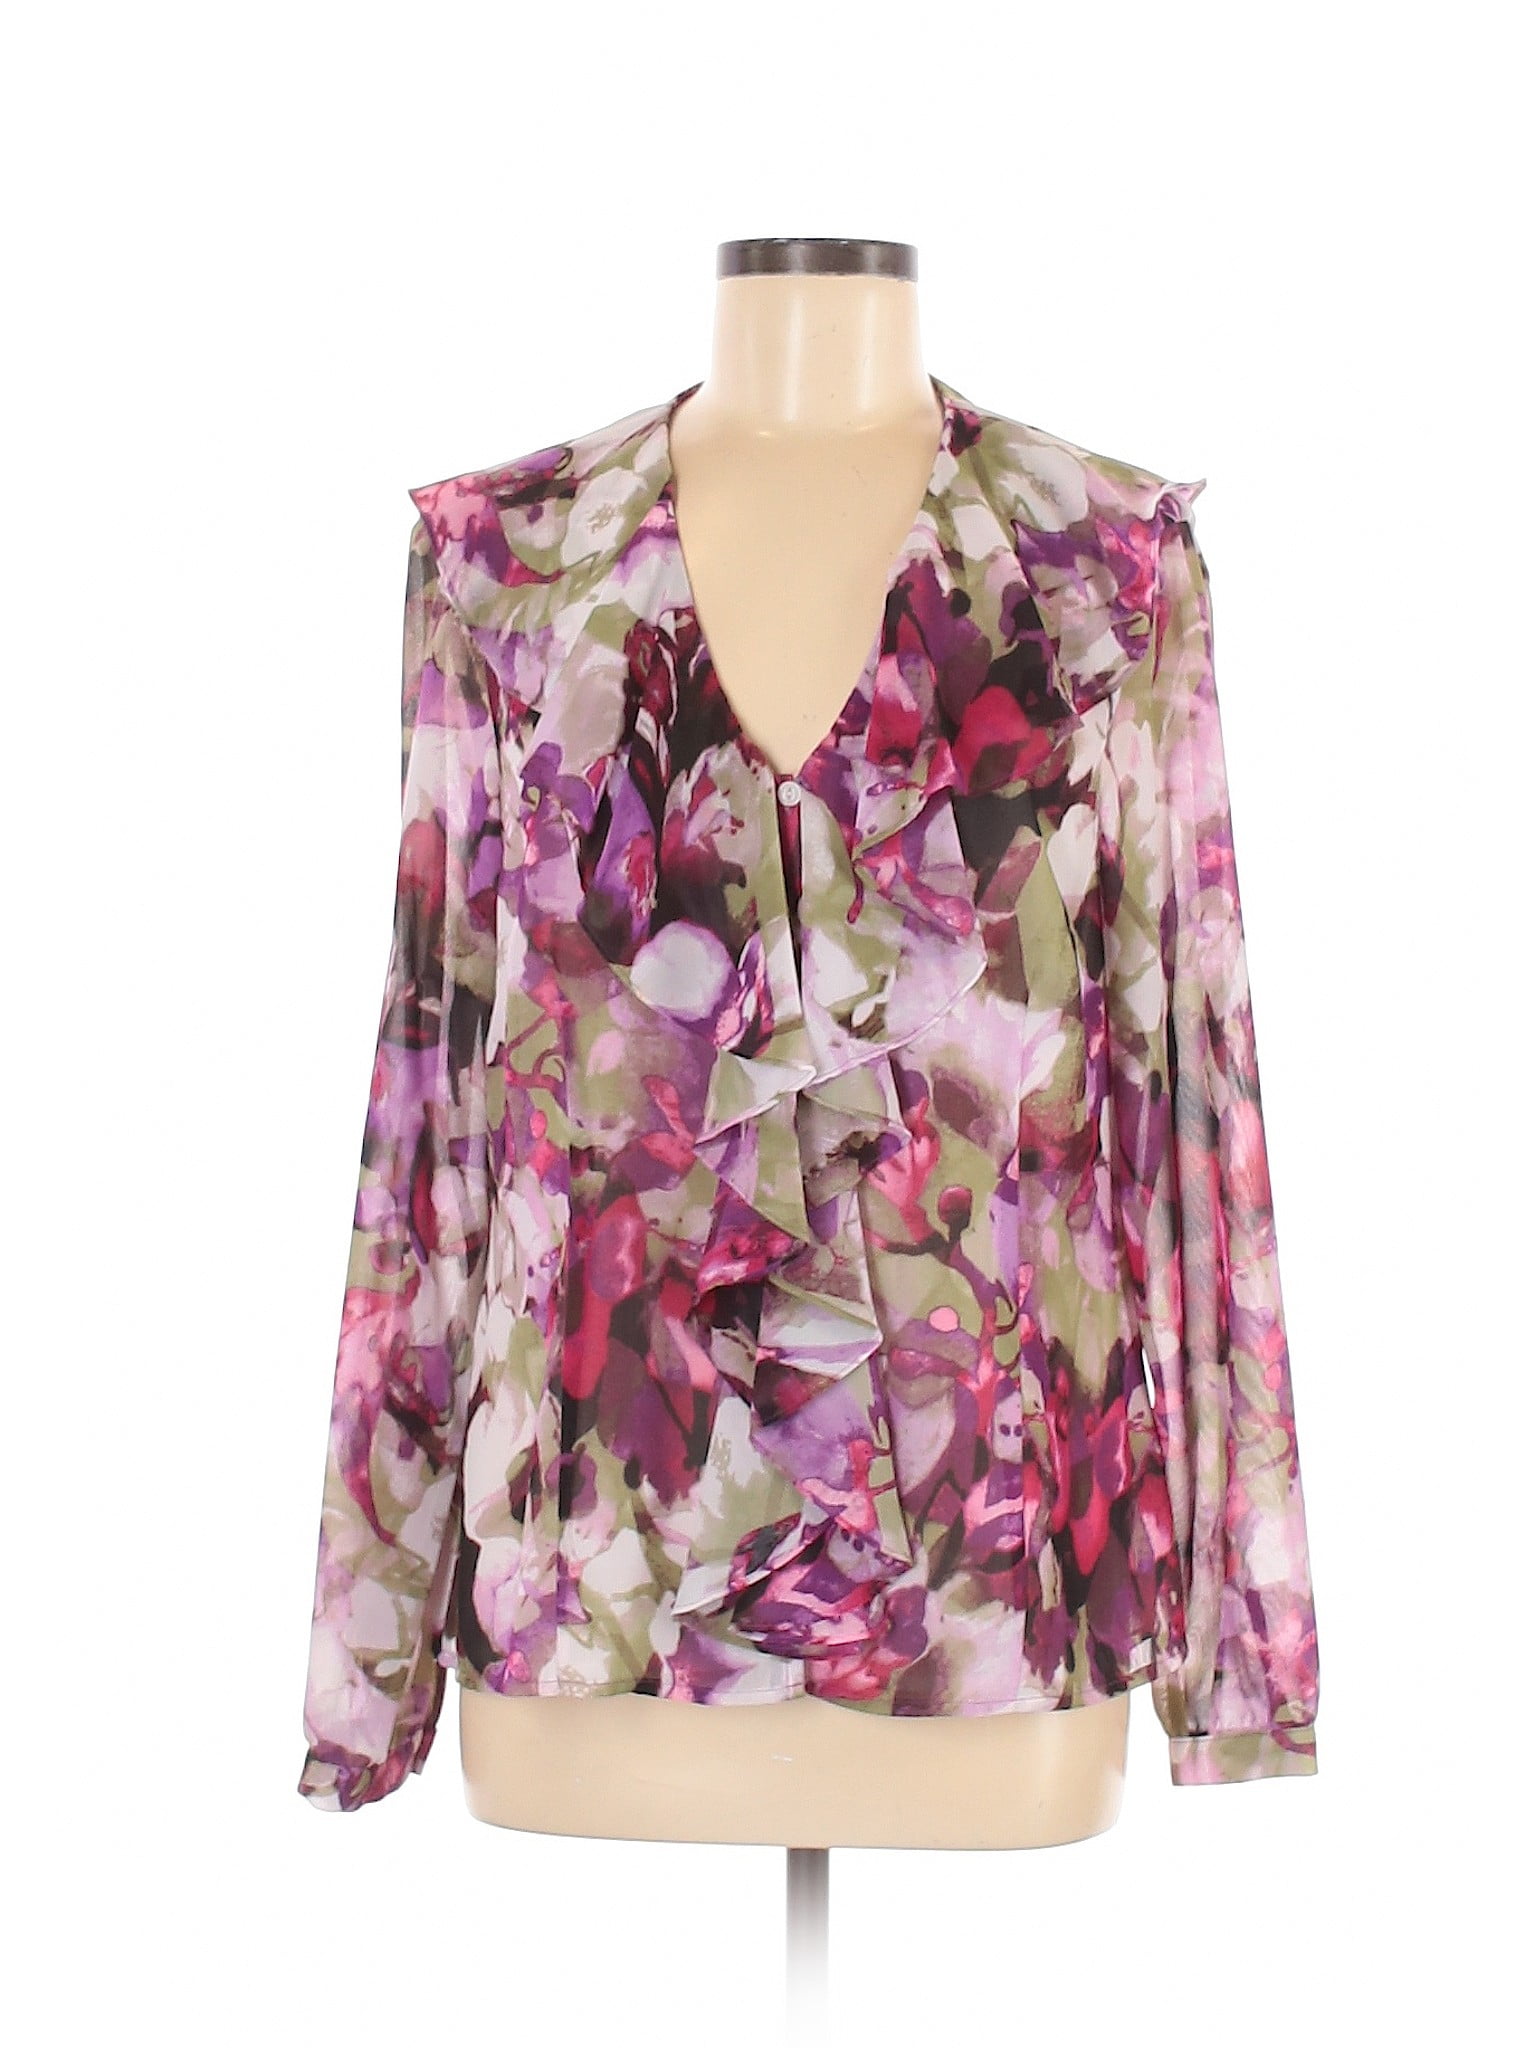 Evan Picone - Pre-Owned Evan Picone Women's Size 12 Long Sleeve Blouse ...